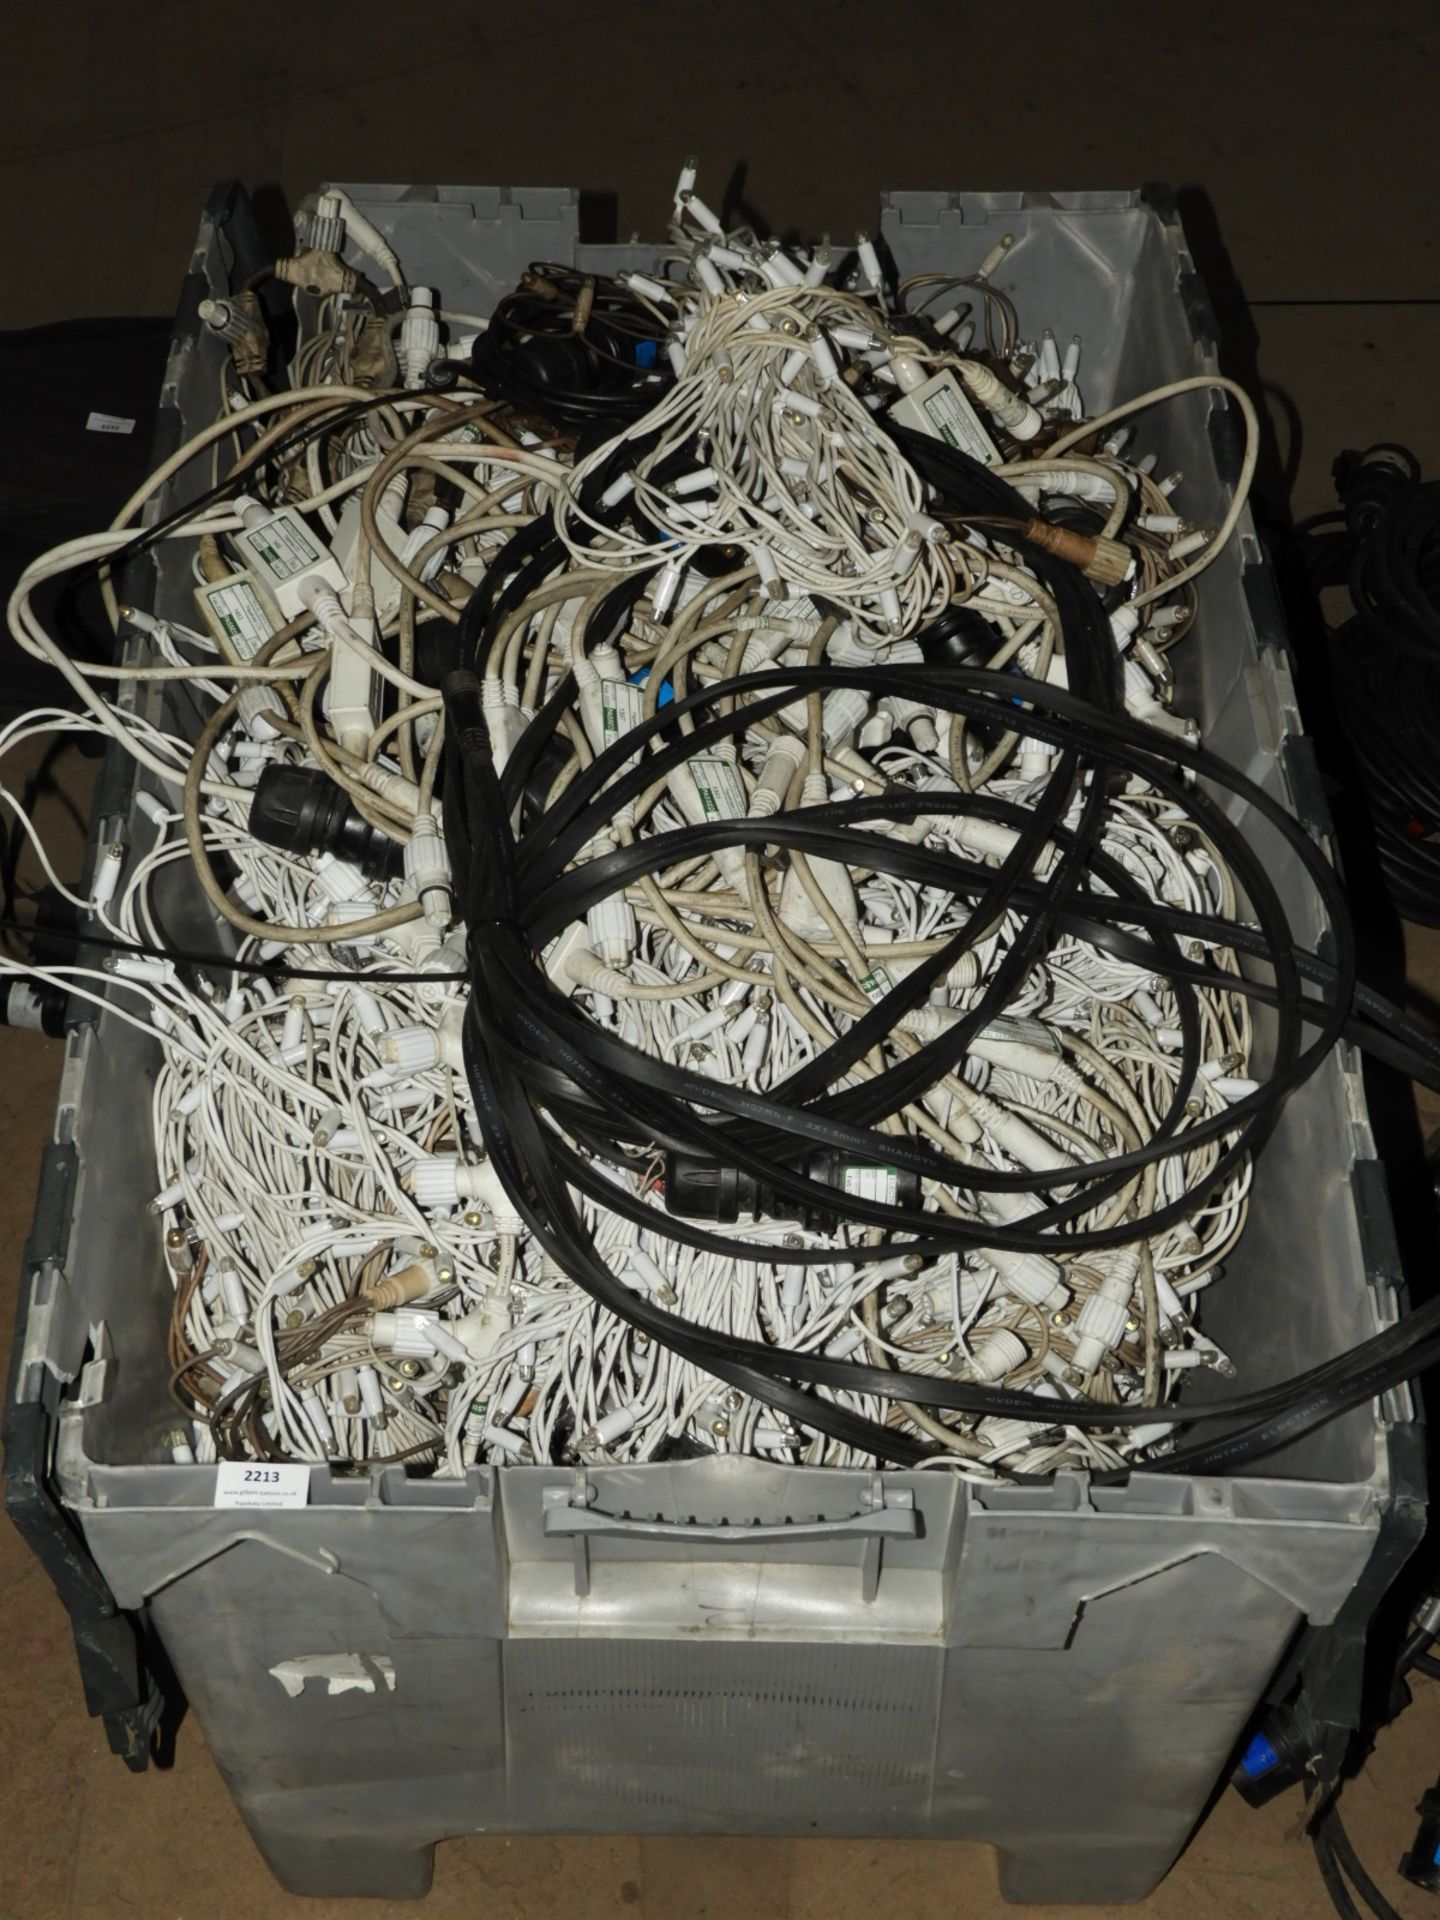 *Large Quantity of LED Fairy Lights with Power Supply Cables and Power Splitters